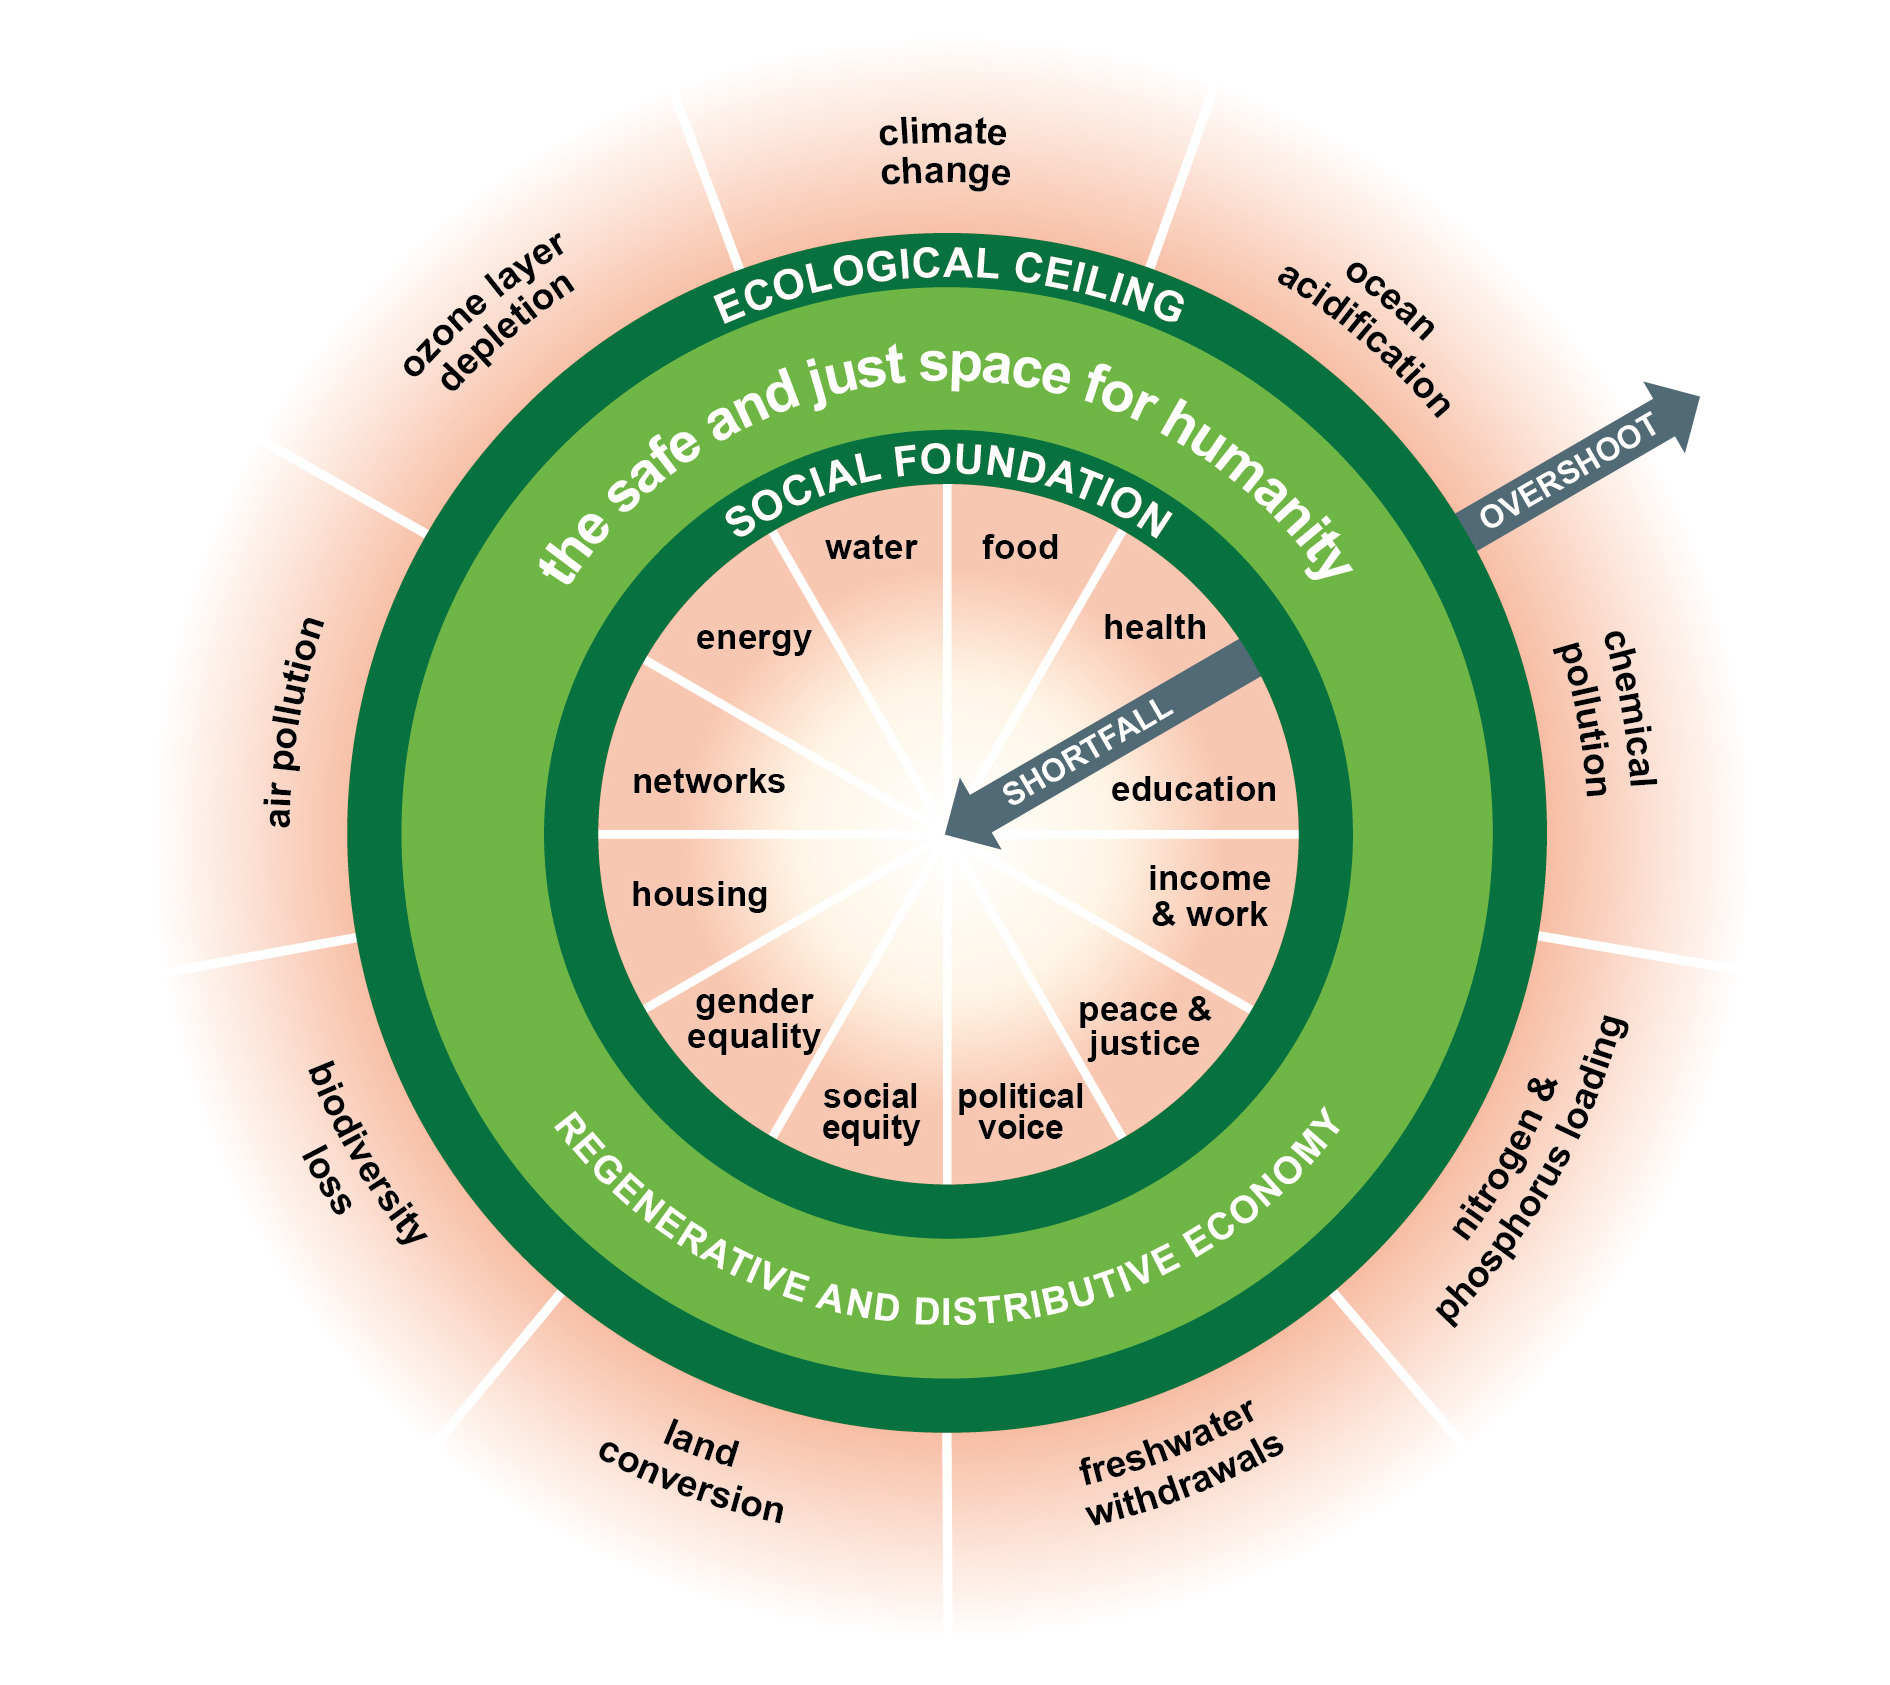 Doughnut Economics: What is it and how can it shape Dublin’s next Local Economic and Community Plan